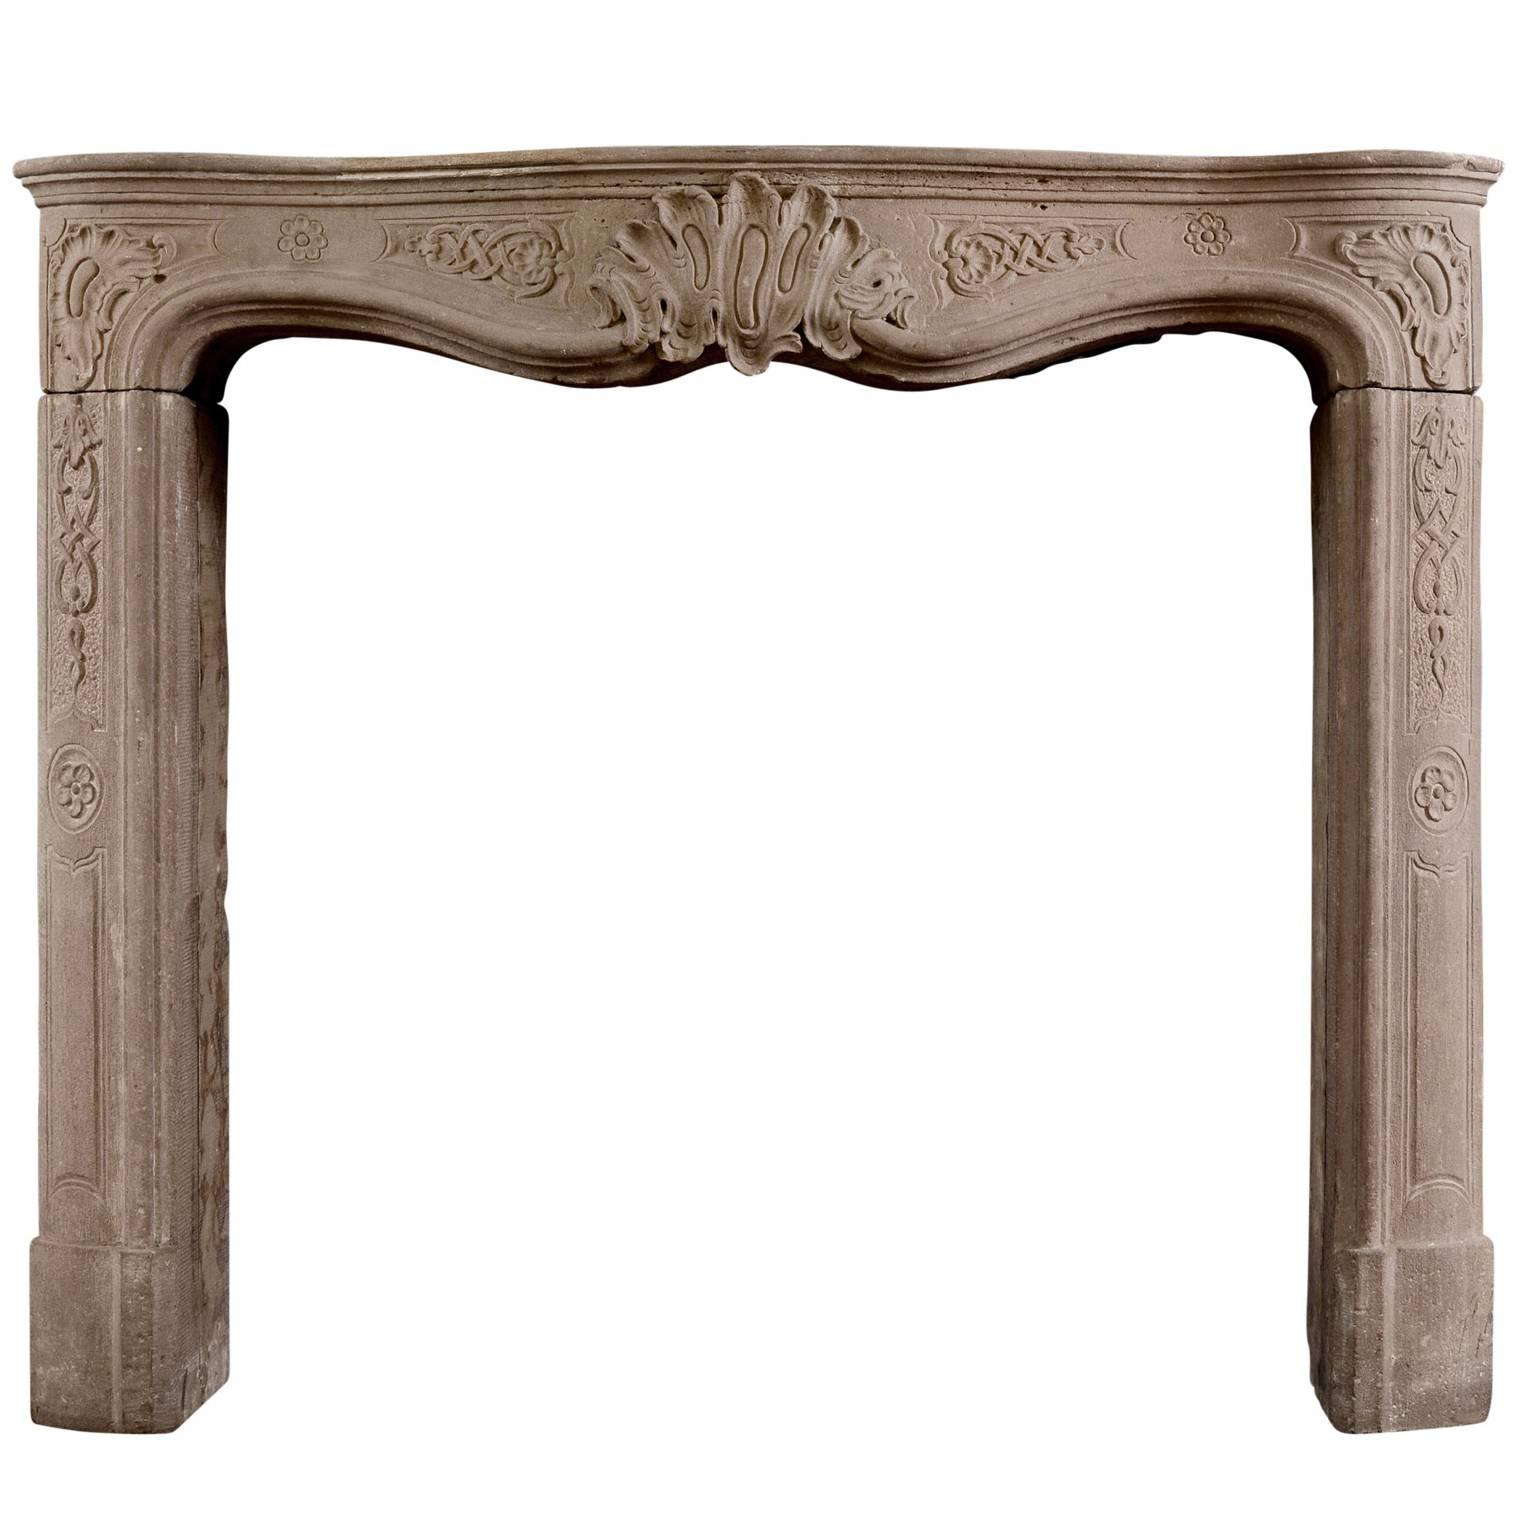 Period 18th Century French Louis XV Chimneypiece For Sale